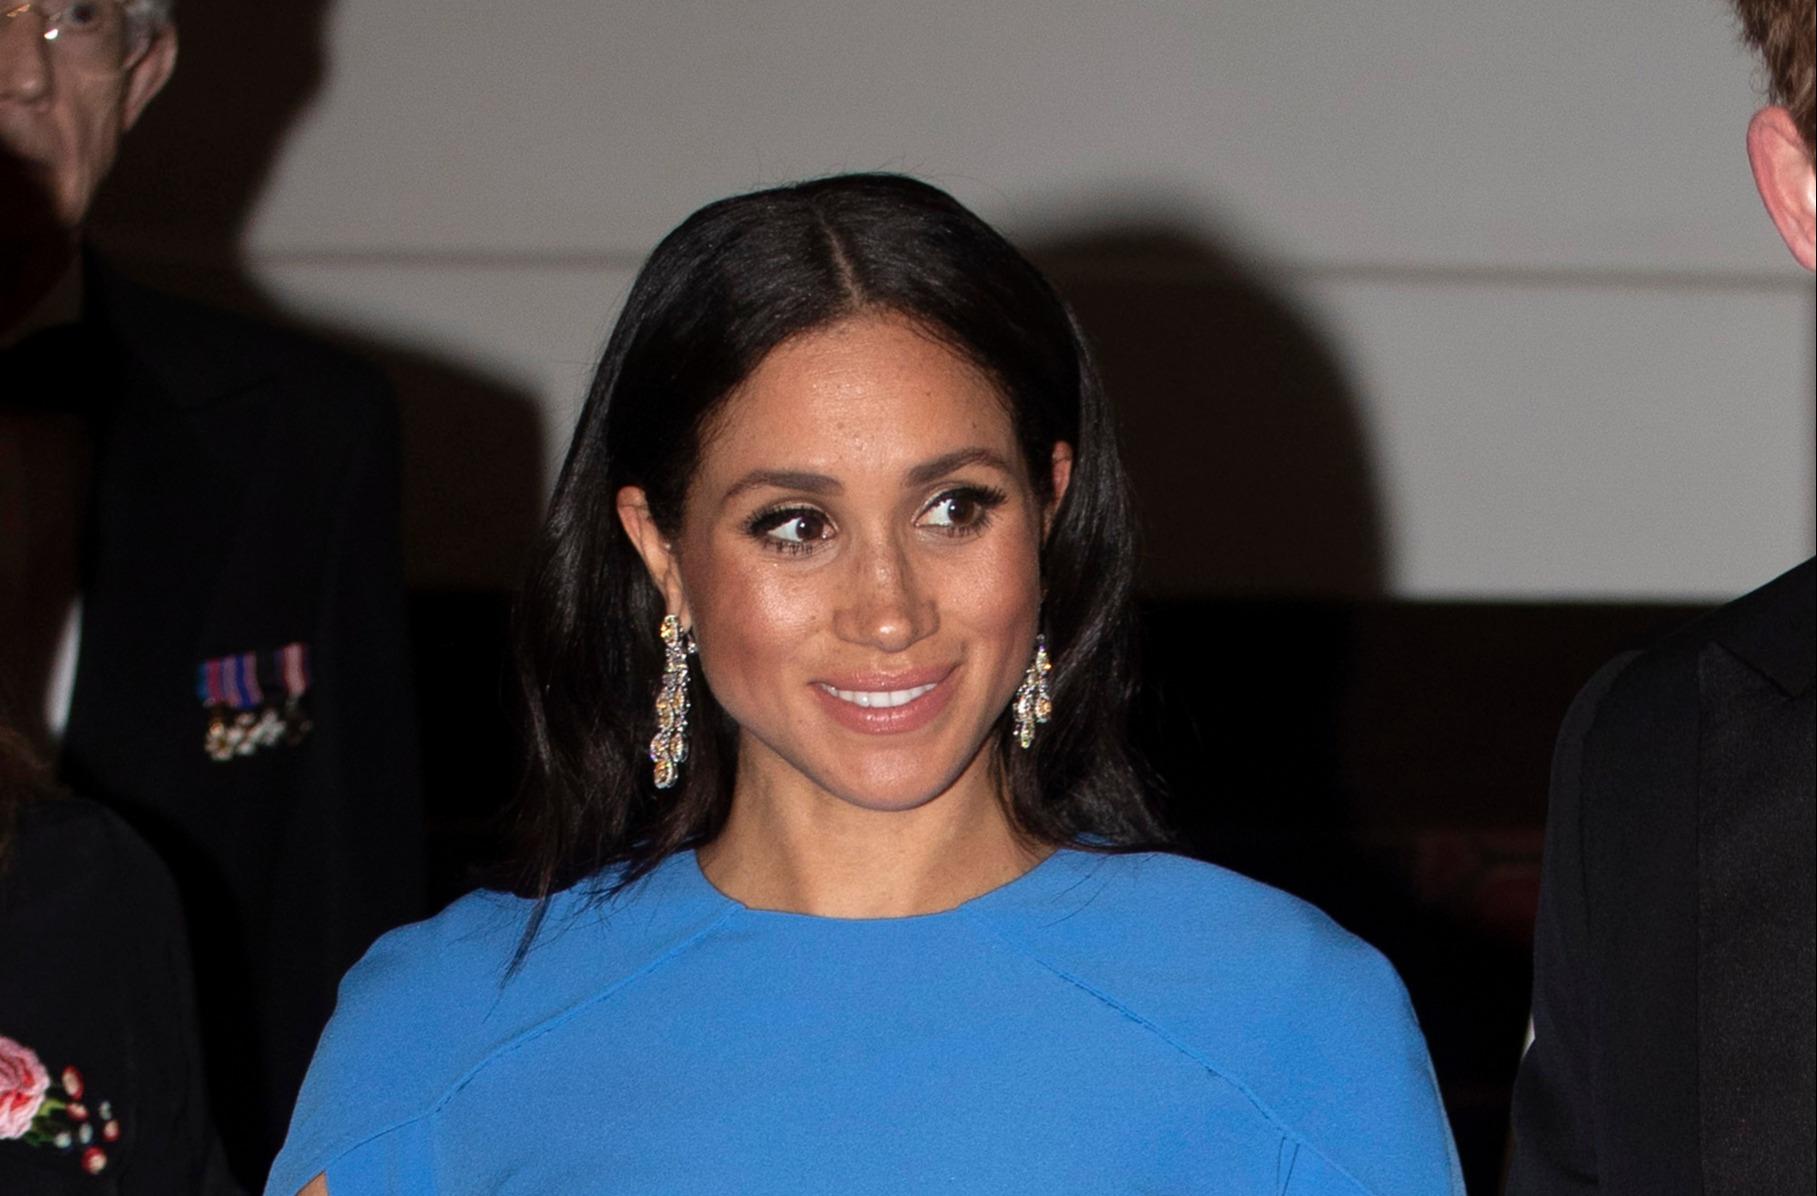 Blood jewels: Are Meghan Markle and Prince Harry supporting murder ...